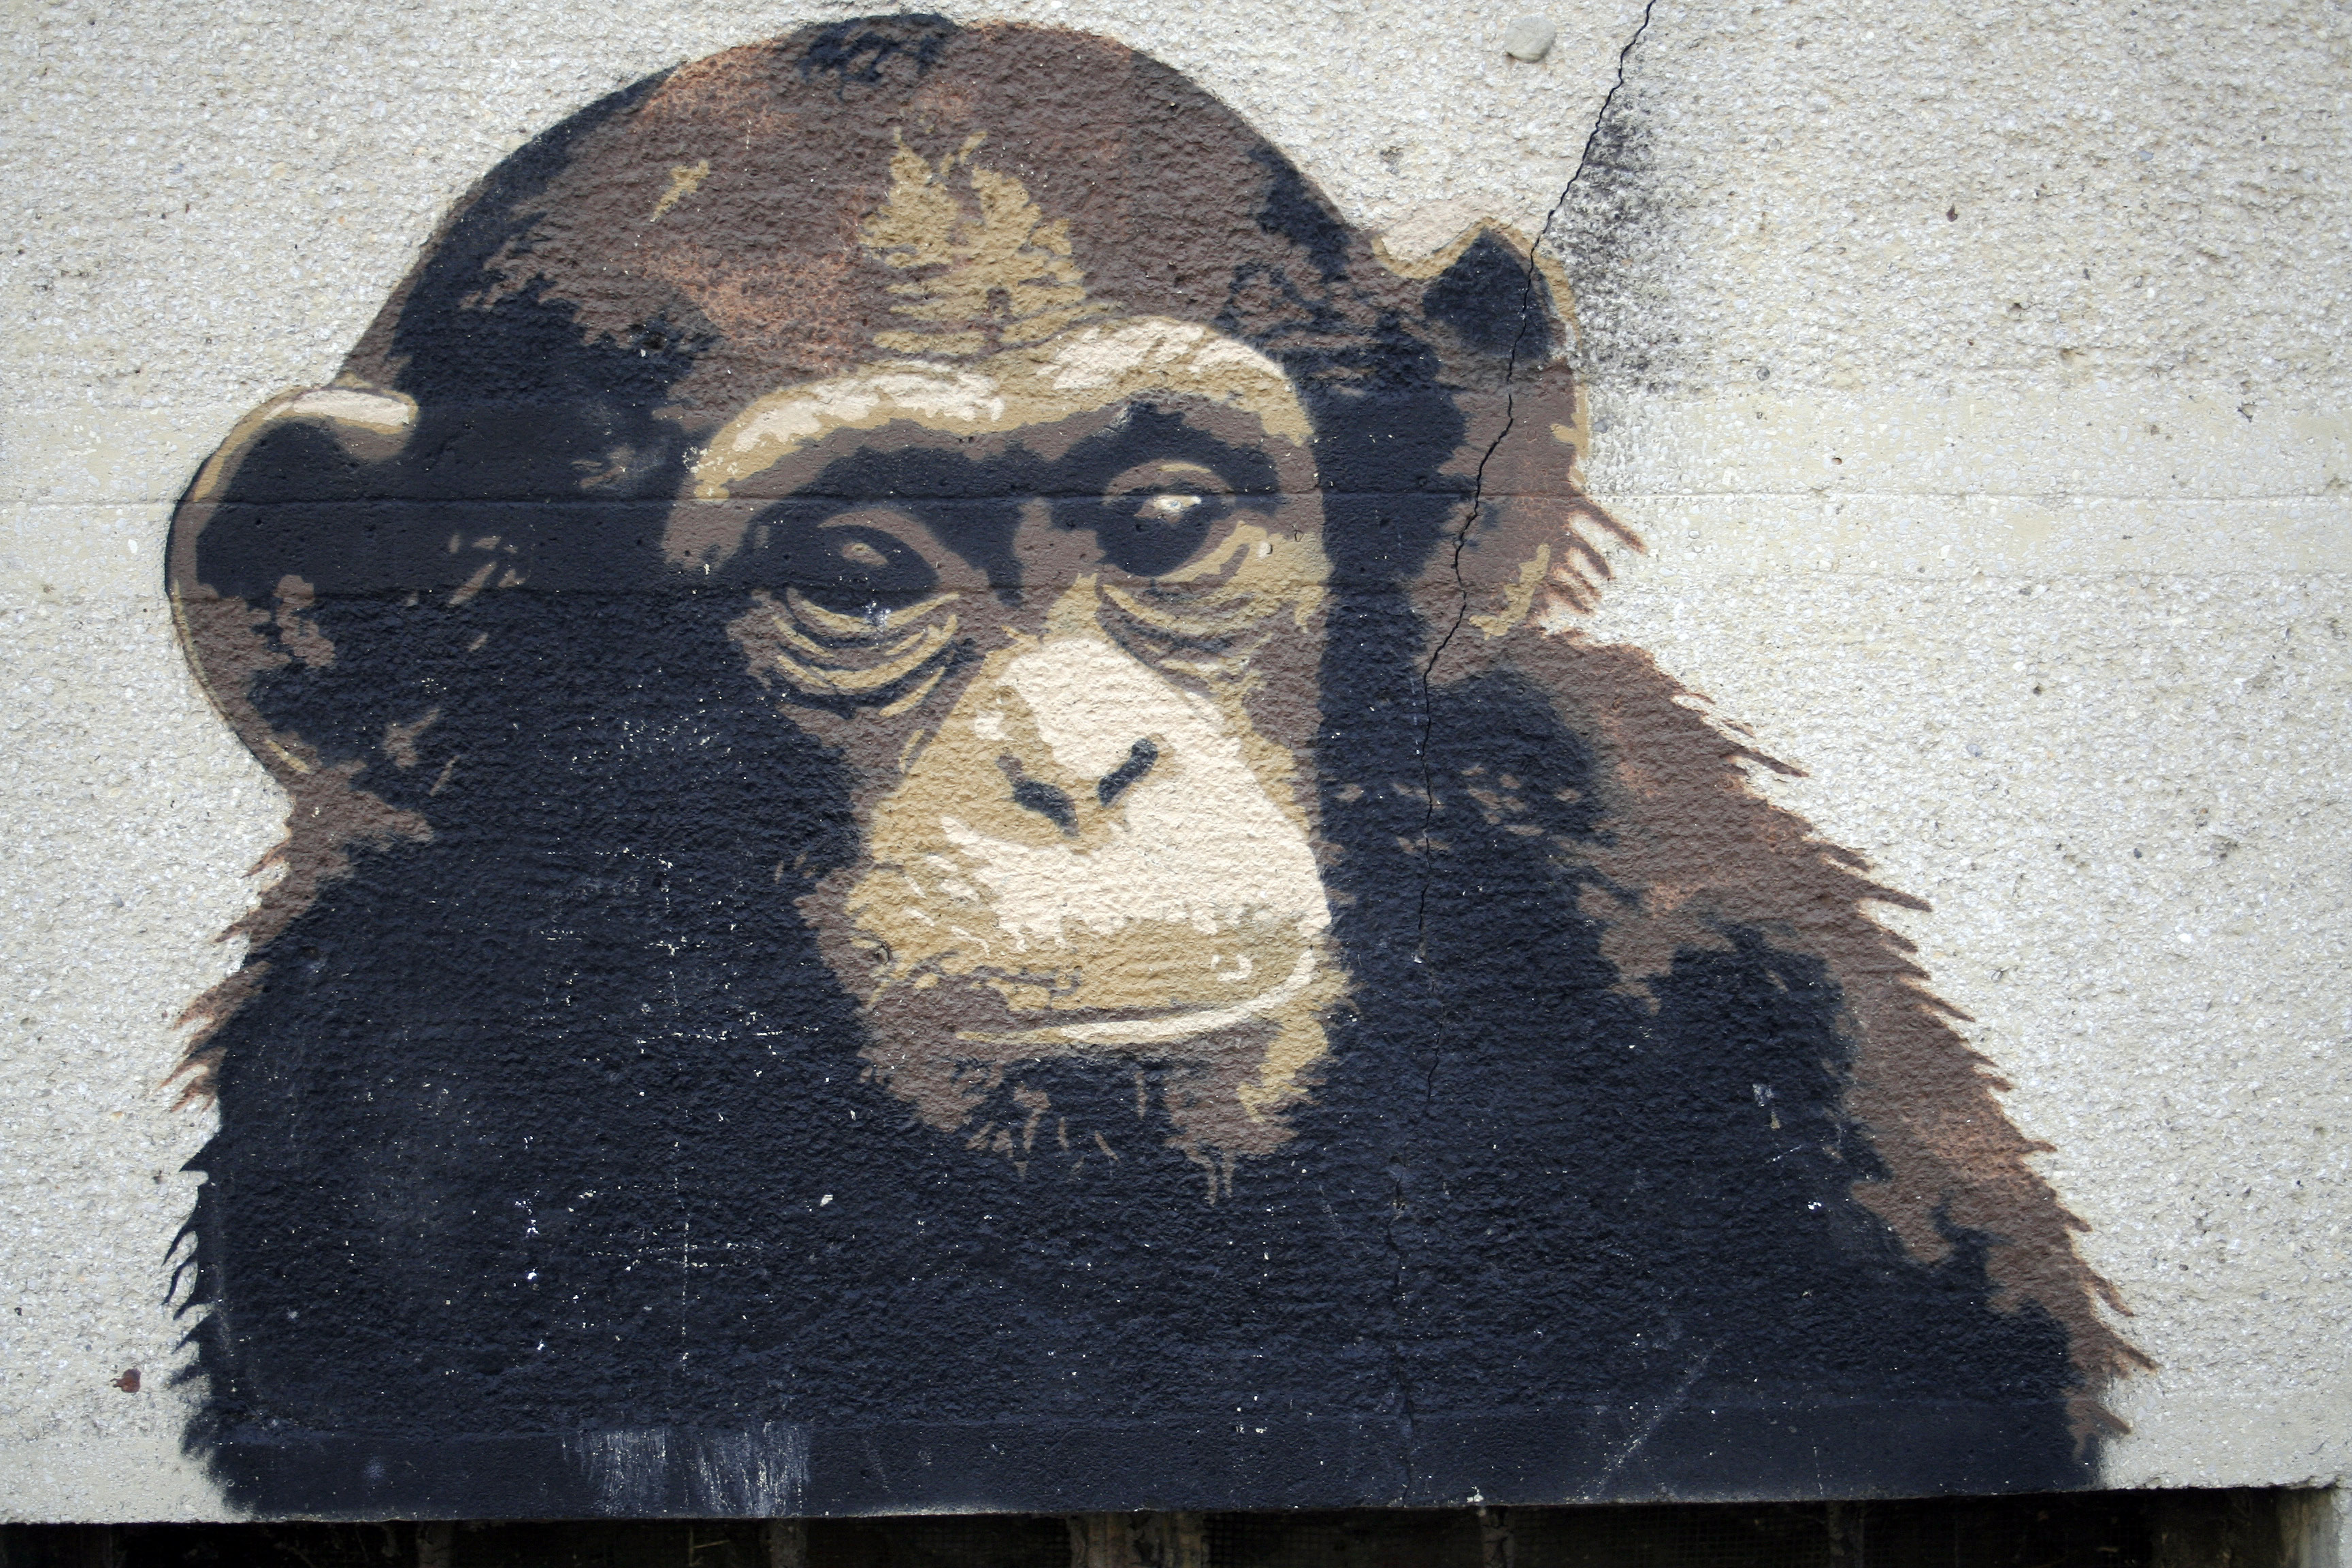 Grunge monkey painting in a wall | TexturePalace.com